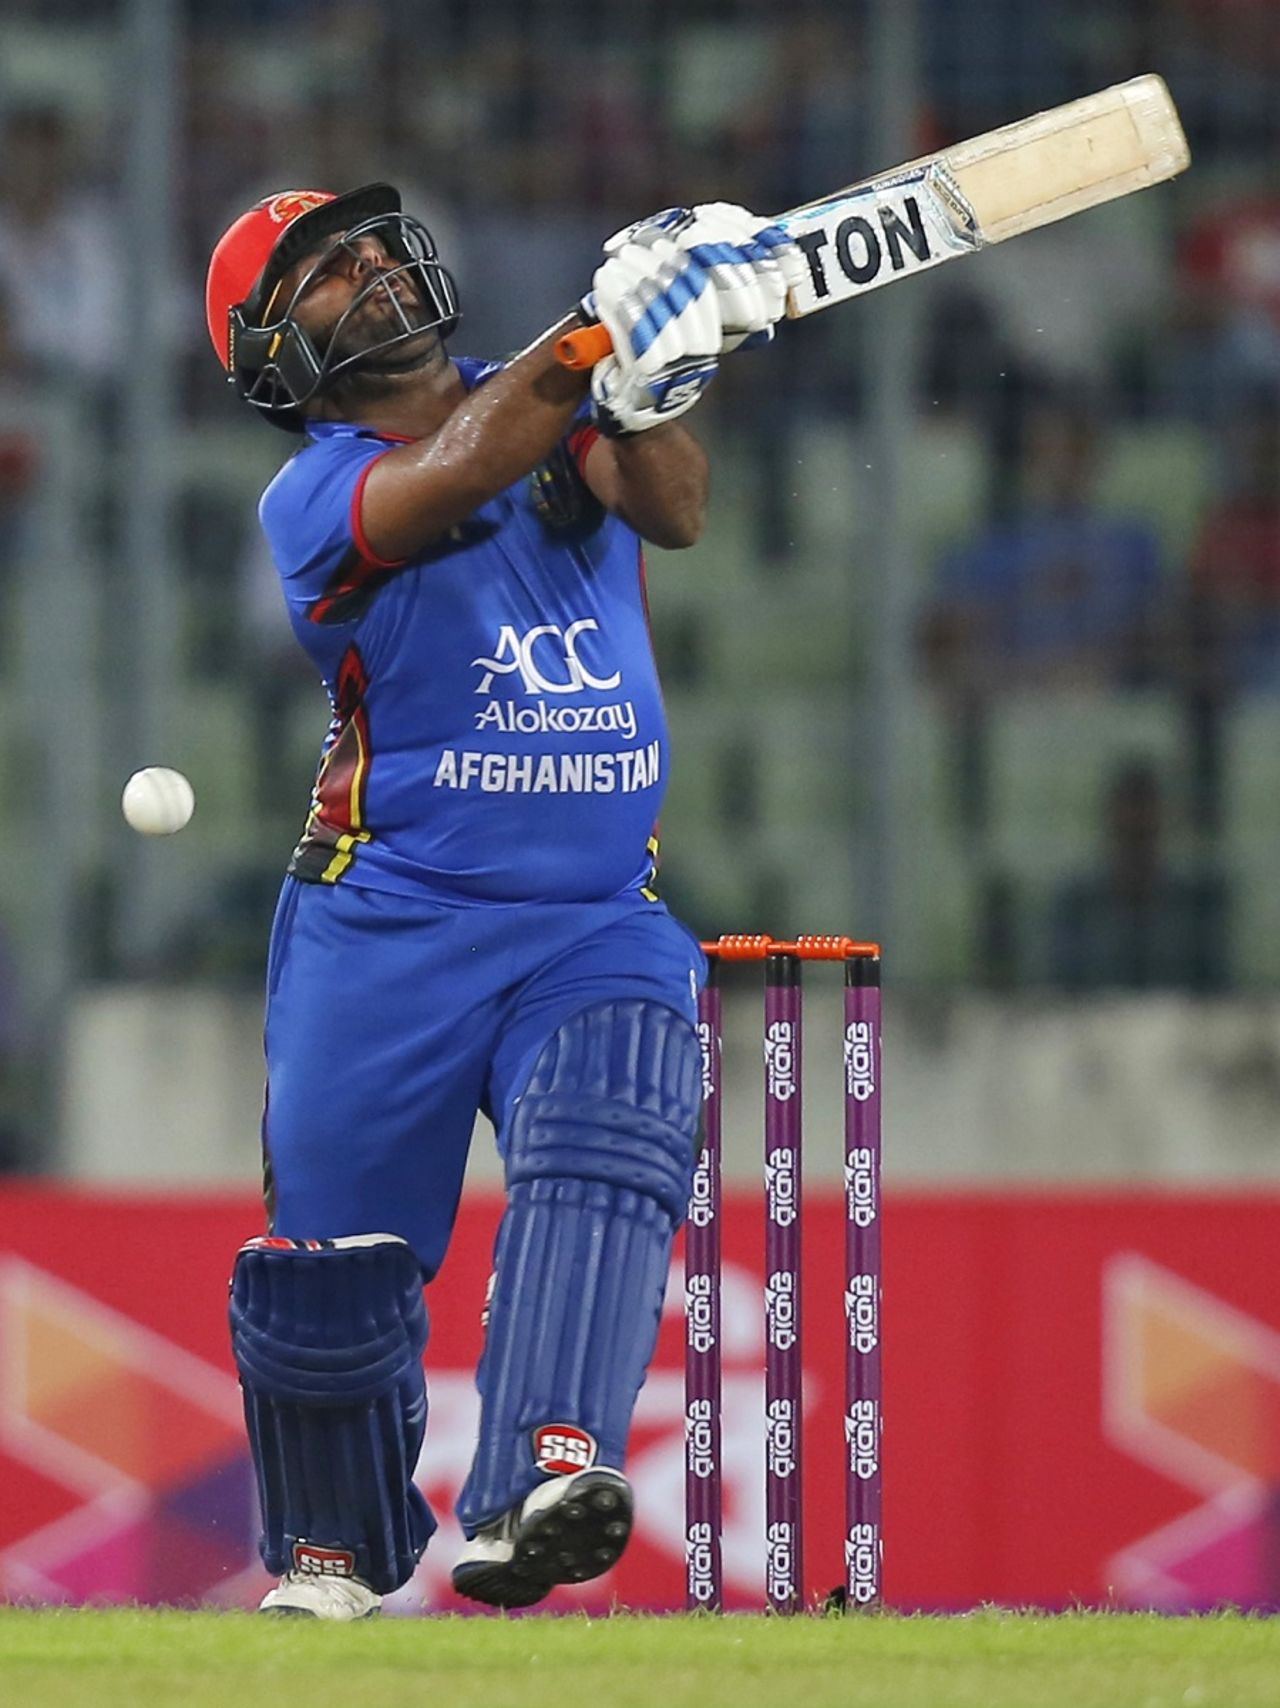 Mohammad Shahzad clubbed his way to 31 off 21 balls, Bangladesh v Afghanistan, 1st ODI, Mirpur, September 25, 2016